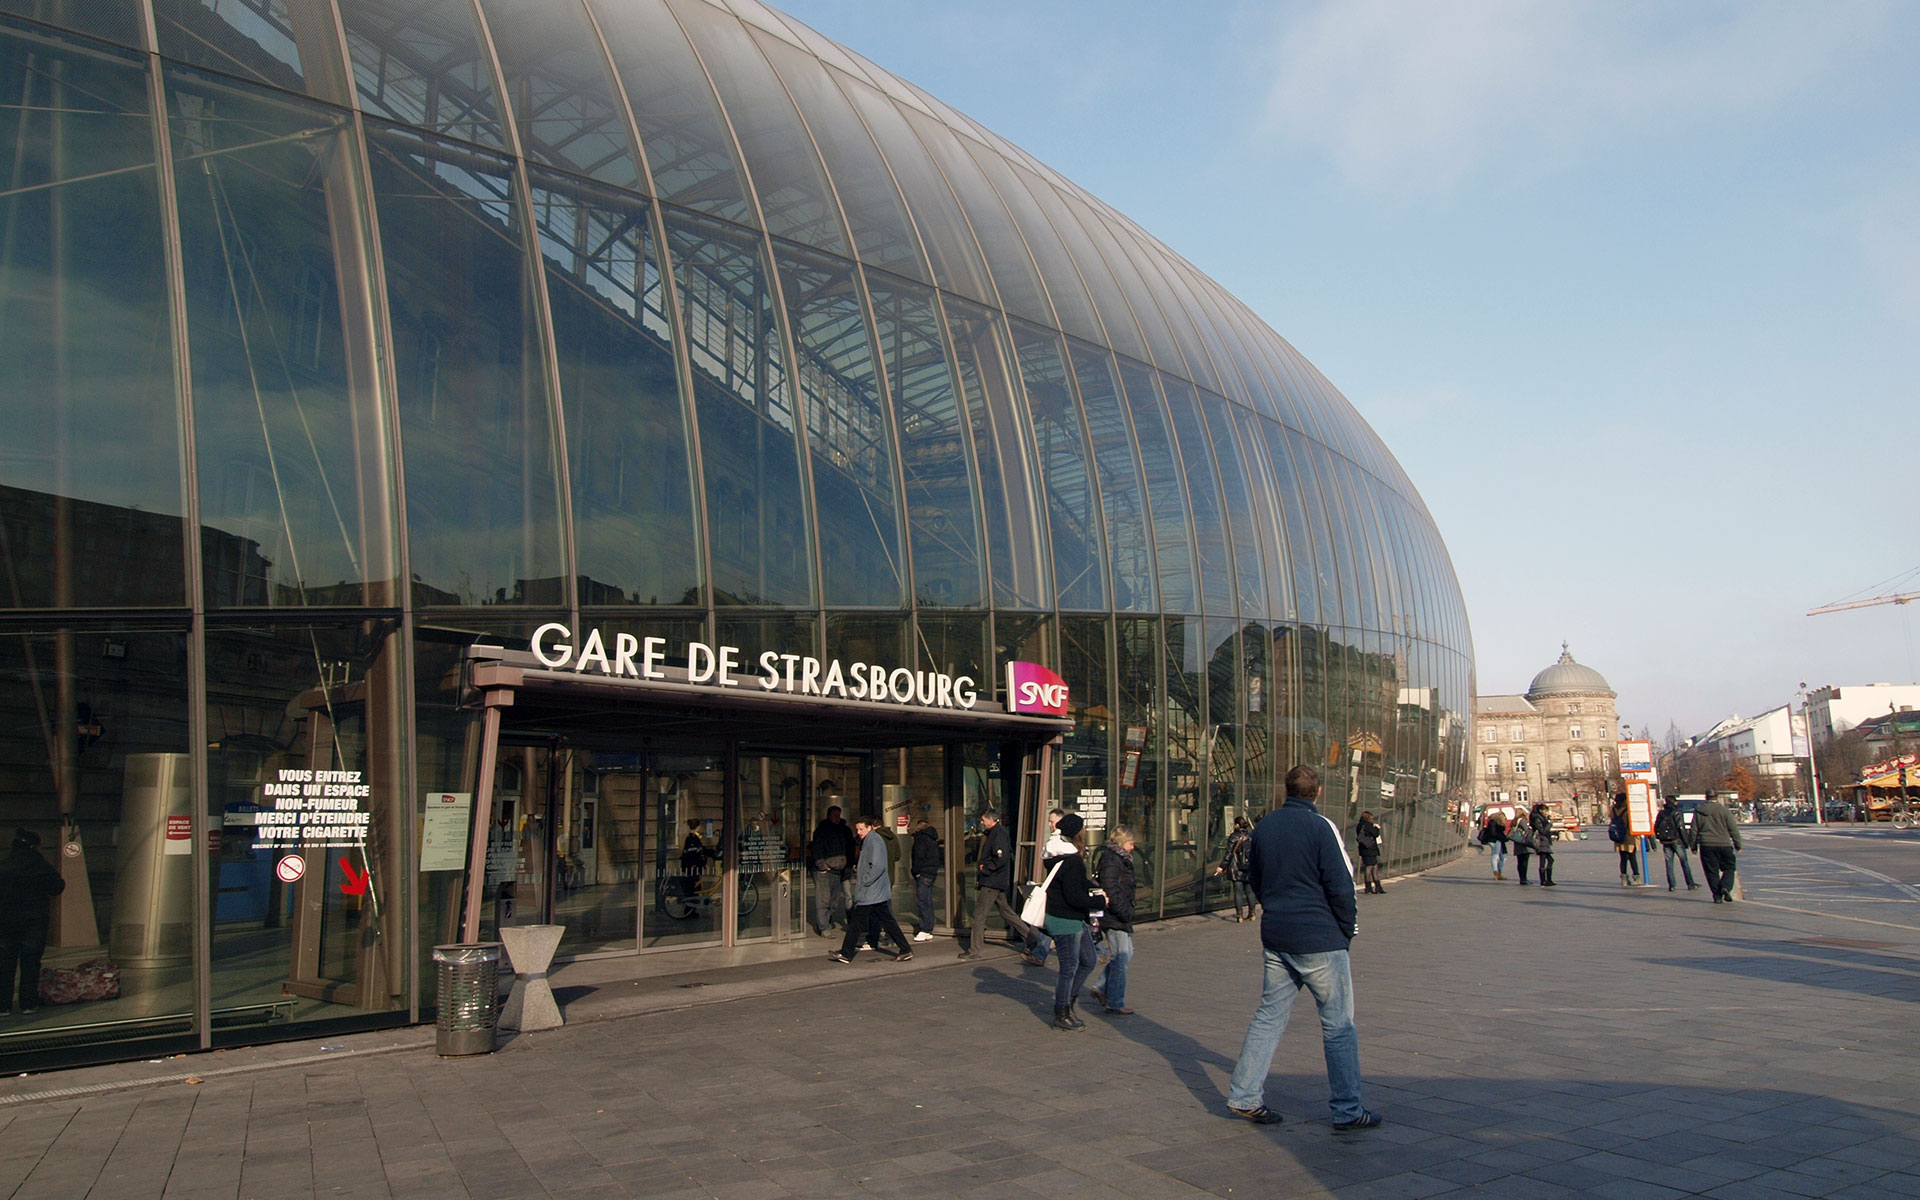 The Gare de Strasbourg, destination of a new high-speed service from Brussels which launches on 3 April 2016 (photo © hidden europe).